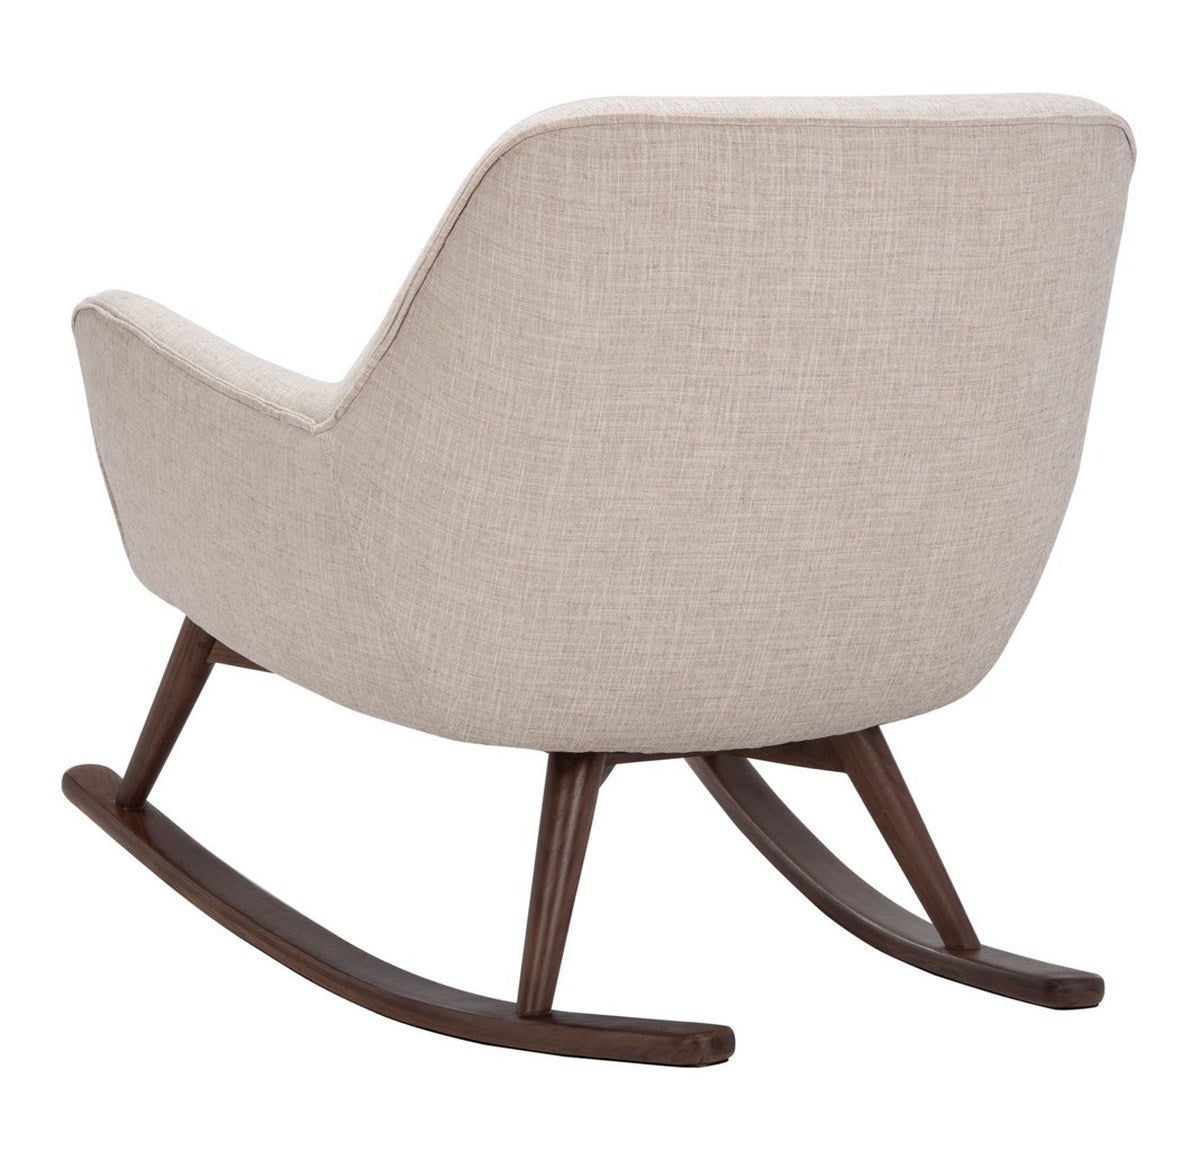 Safavieh Couture Mack Mid Century Rocking Chair - Oatmeal